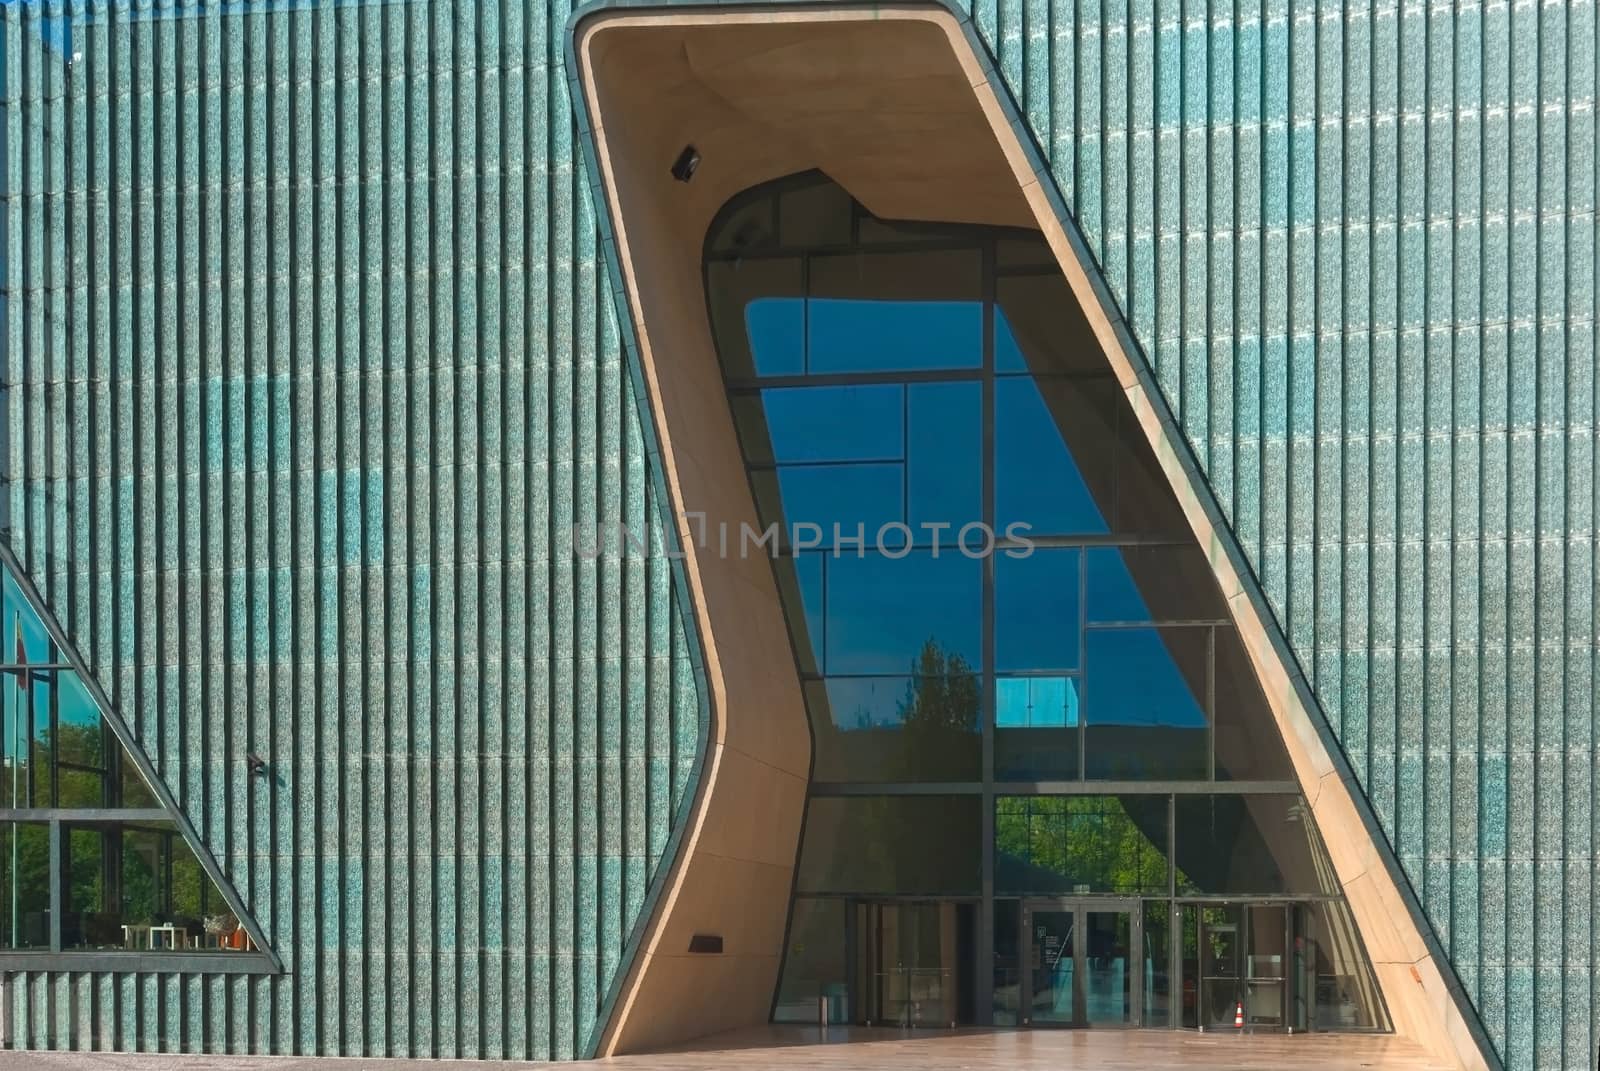 Main entrance and a façade of the new building of the Museum of the History of Polish Jews, Warsaw, Poland. The Museum is located  in Warsaw’s borough of Muranow, in the heart of the old Jewish quarter which became a part of the Warsaw Ghetto in 1940.